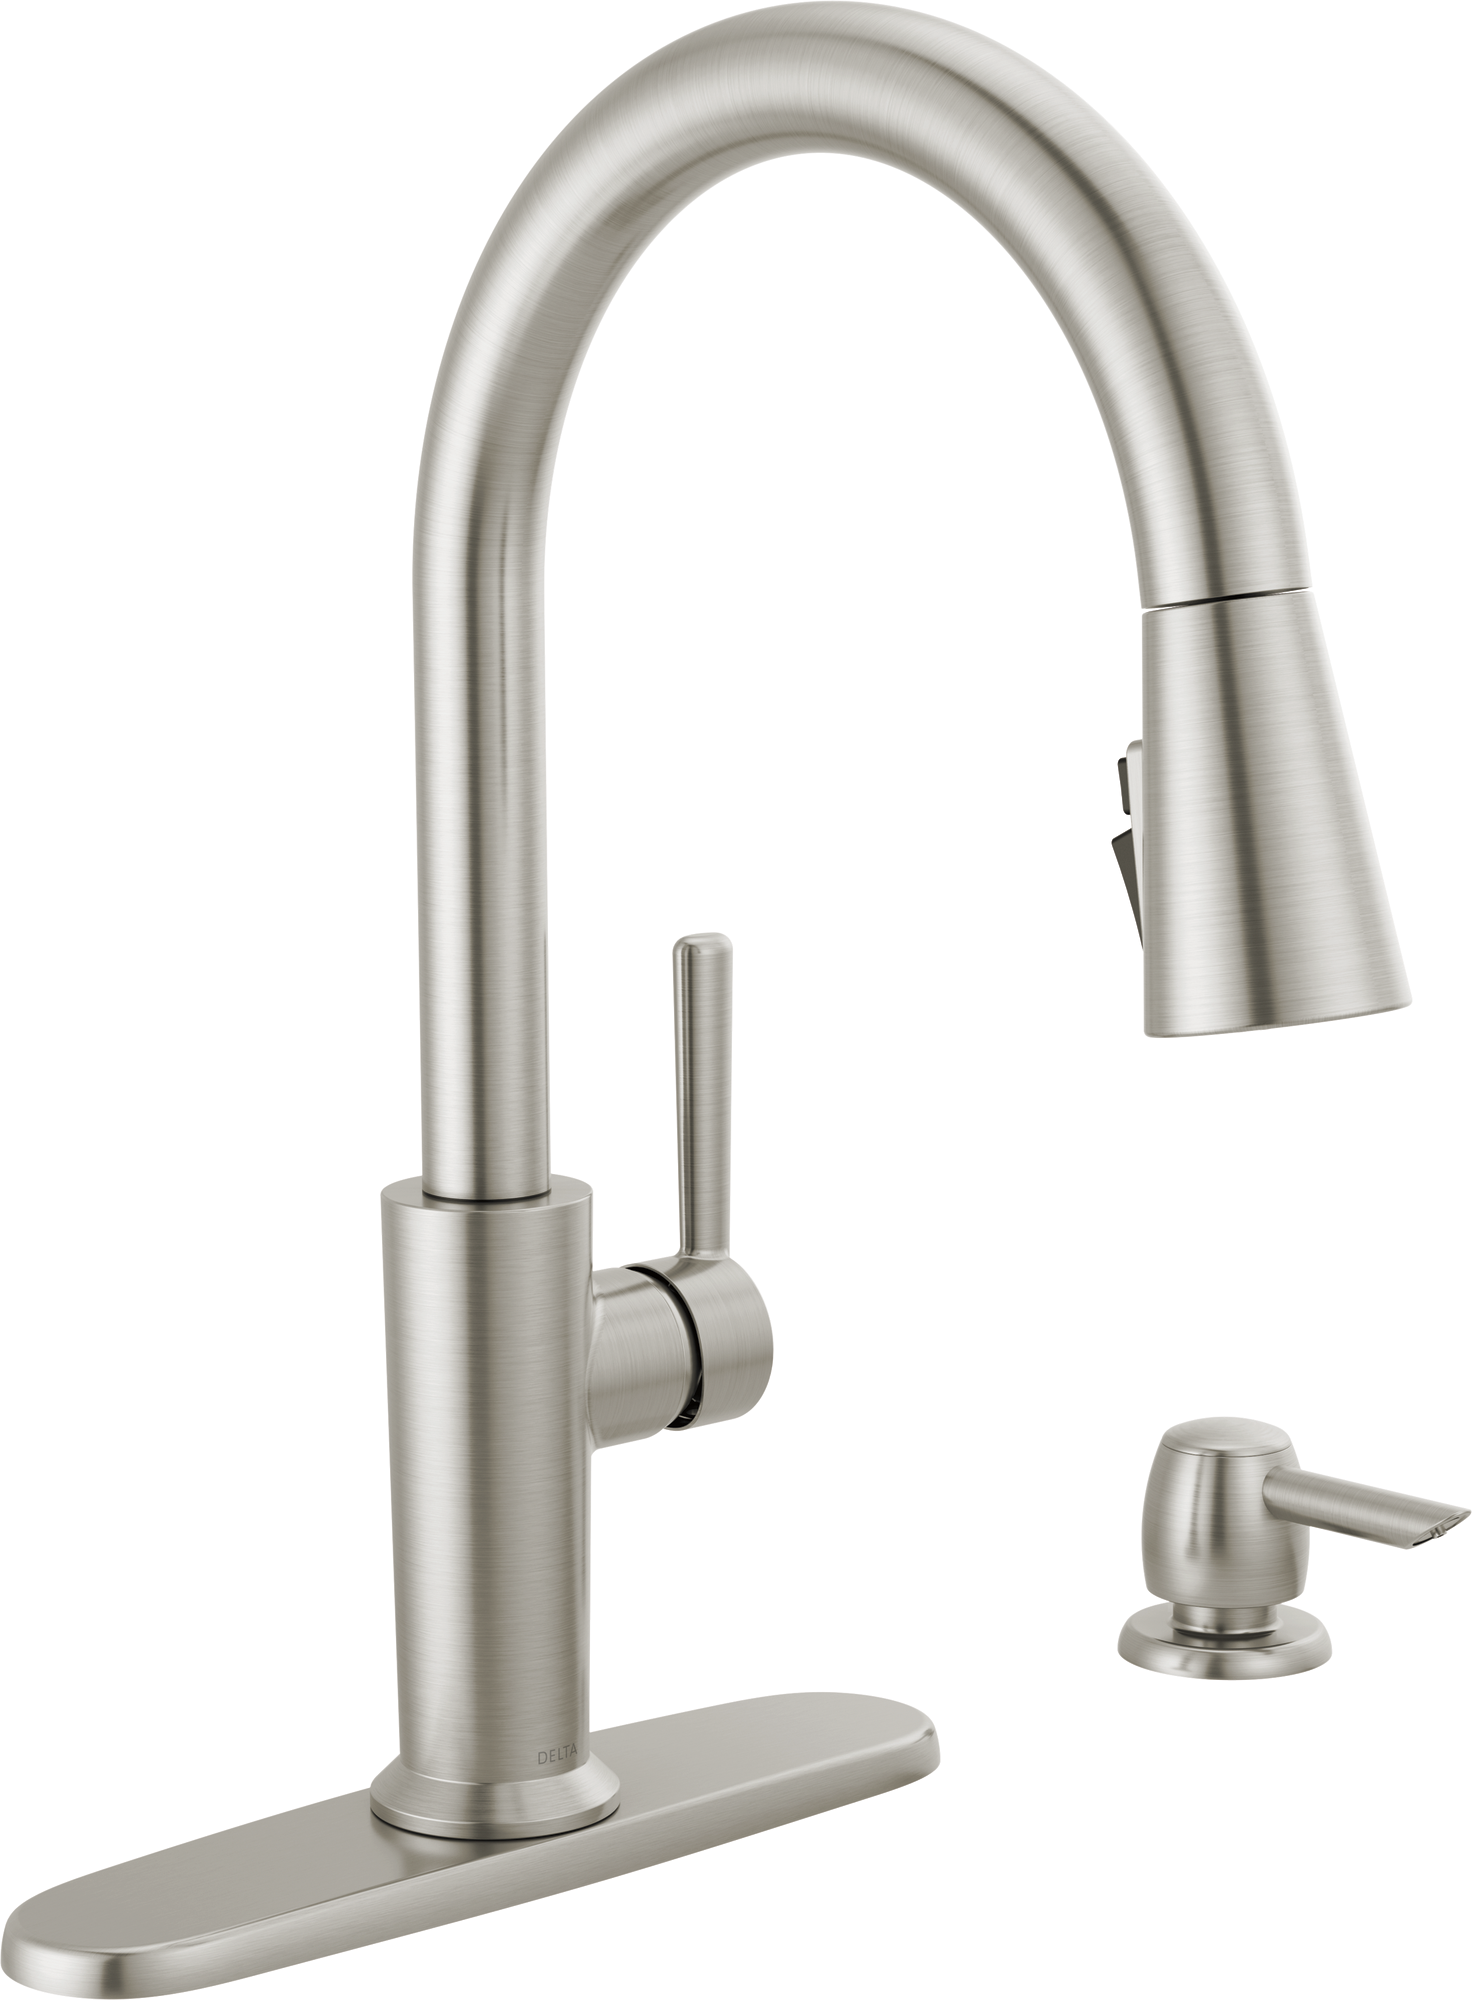 Delta Emery Pulldown Kitchen Faucet with Soap Certified Refurbished